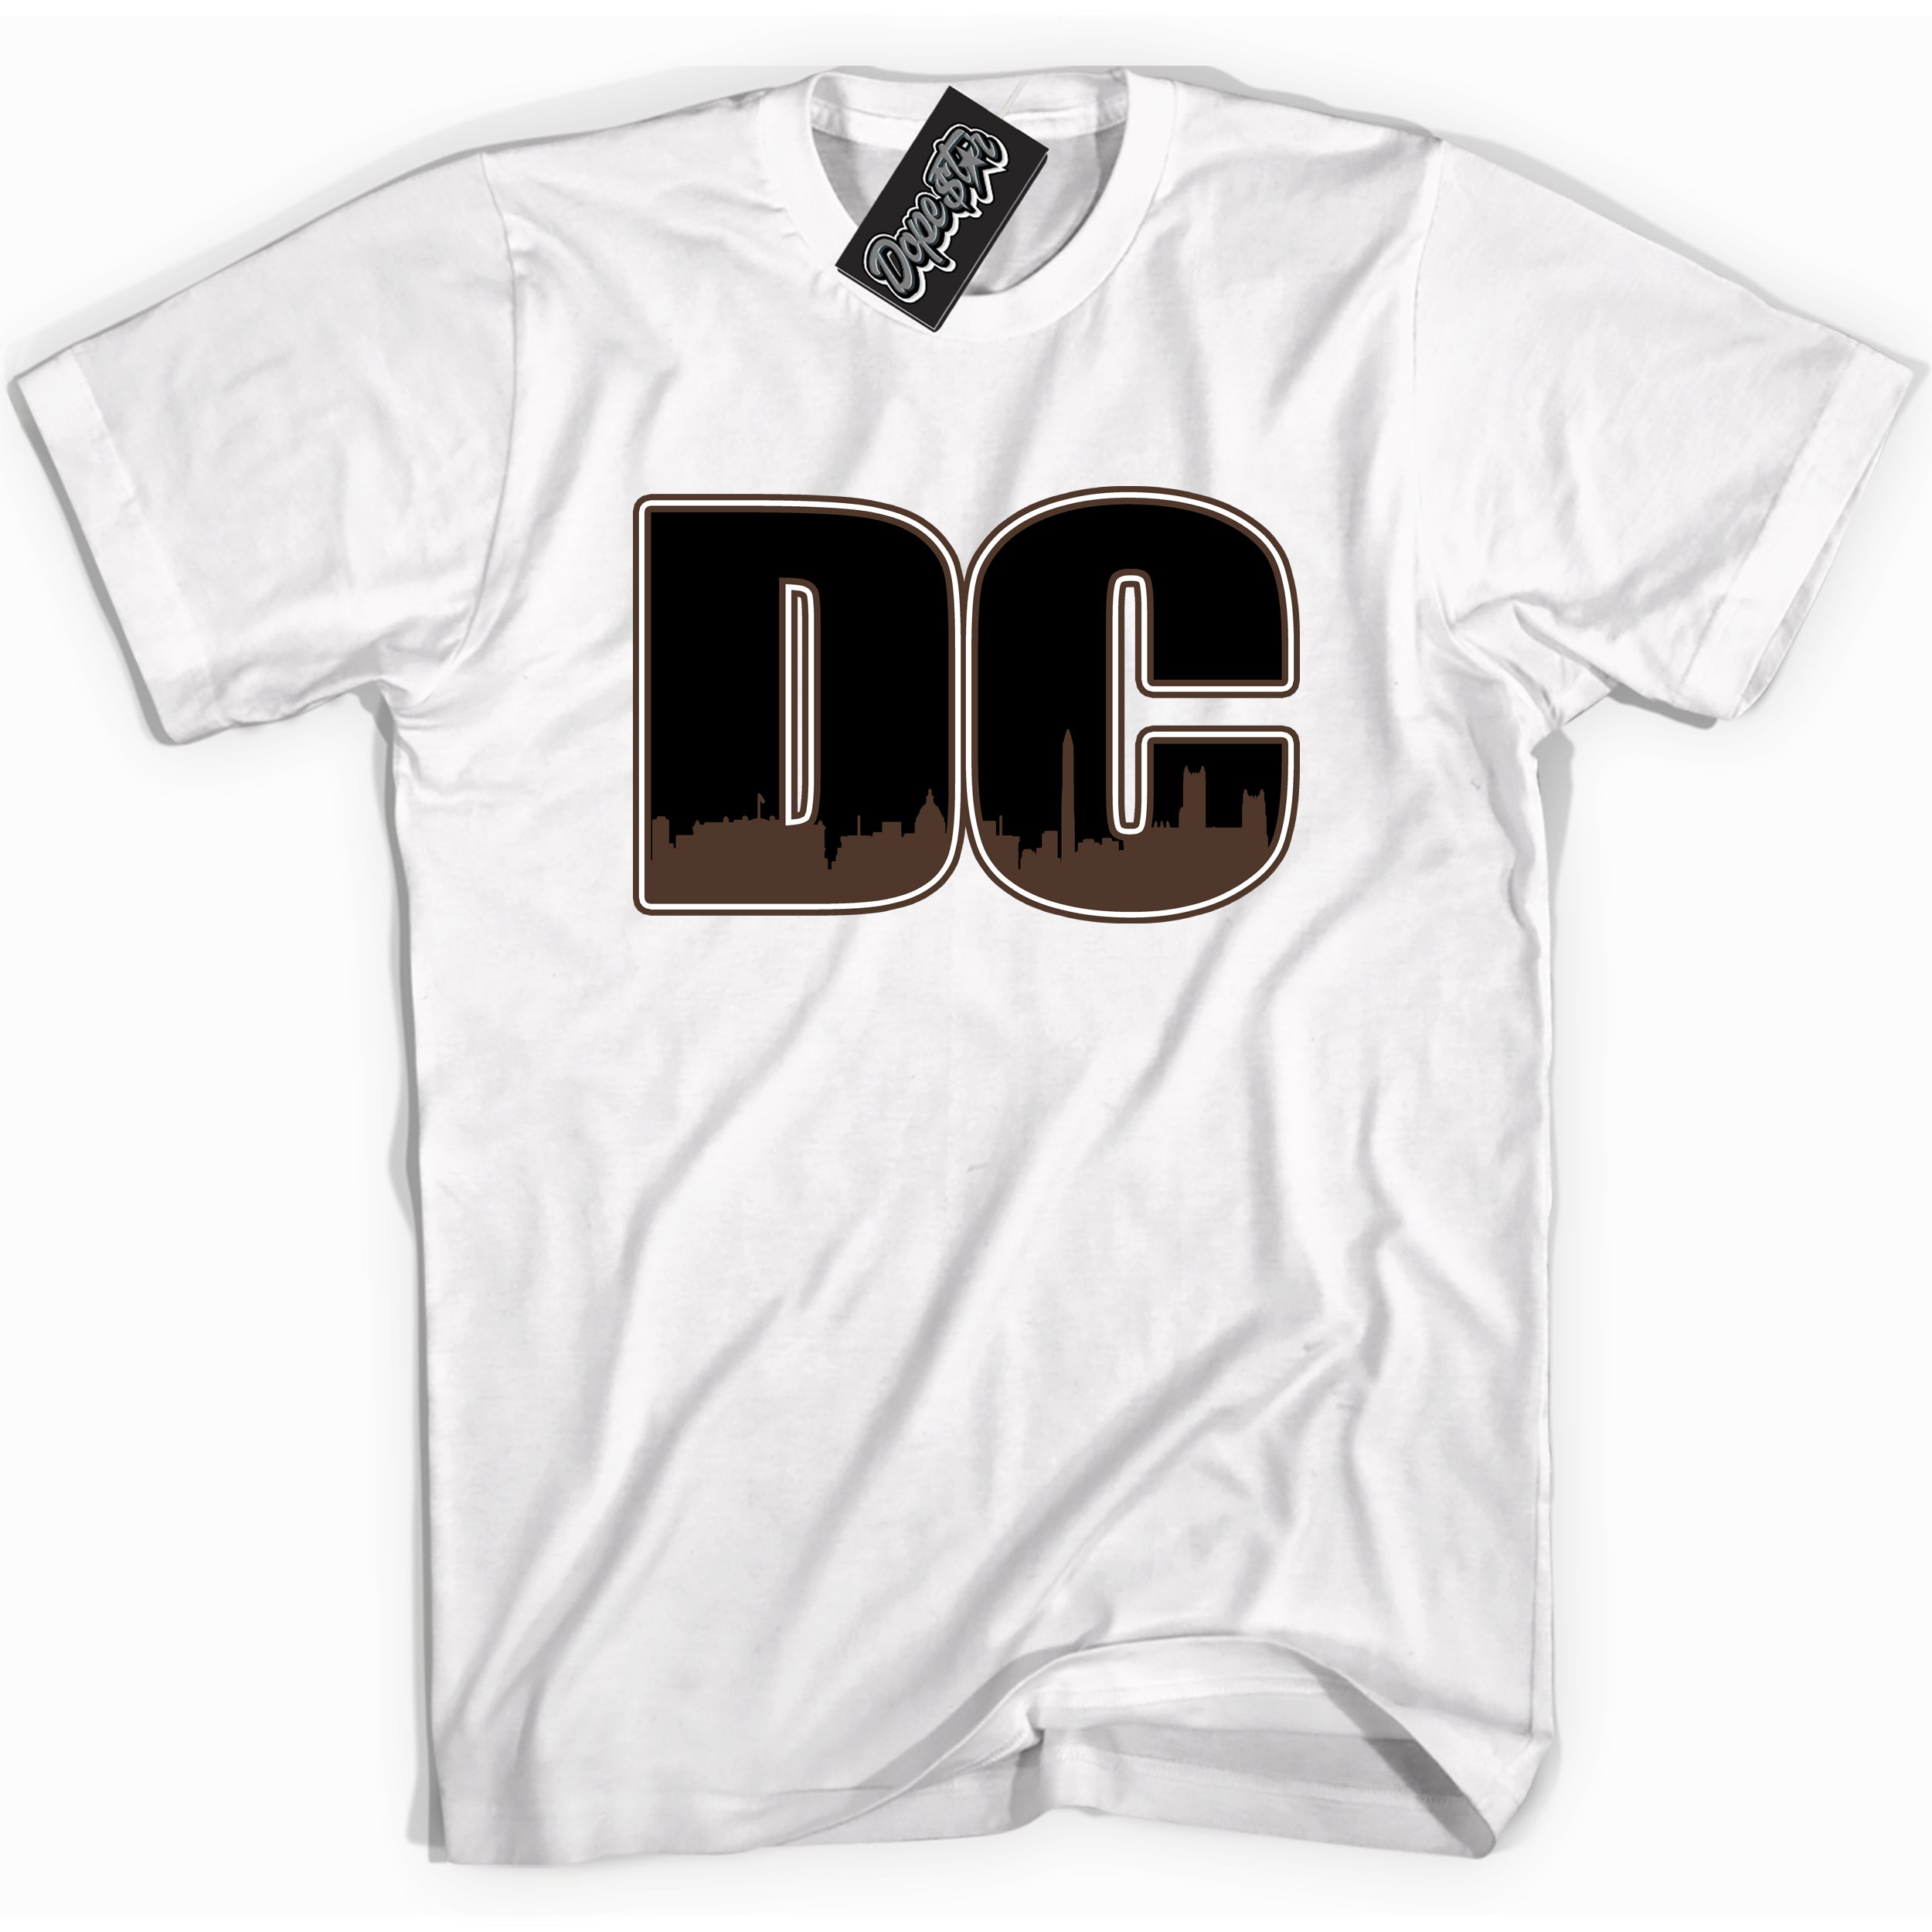 Cool White graphic tee with “ DC ” design, that perfectly matches Palomino 1s sneakers 